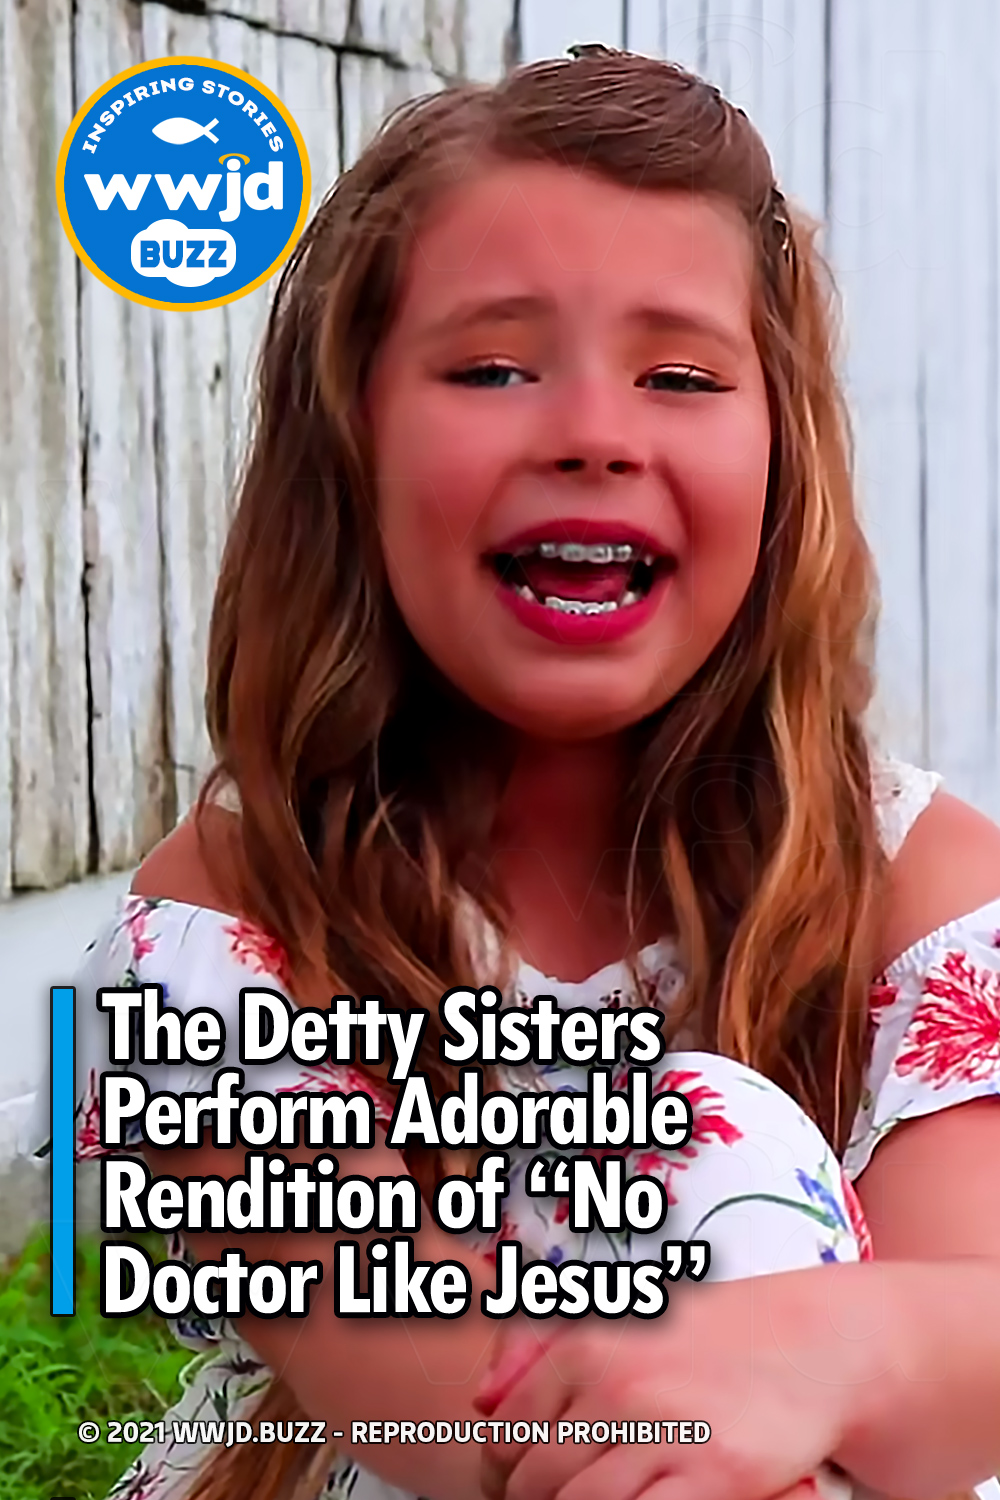 The Detty Sisters Perform Adorable Rendition of “No Doctor Like Jesus”